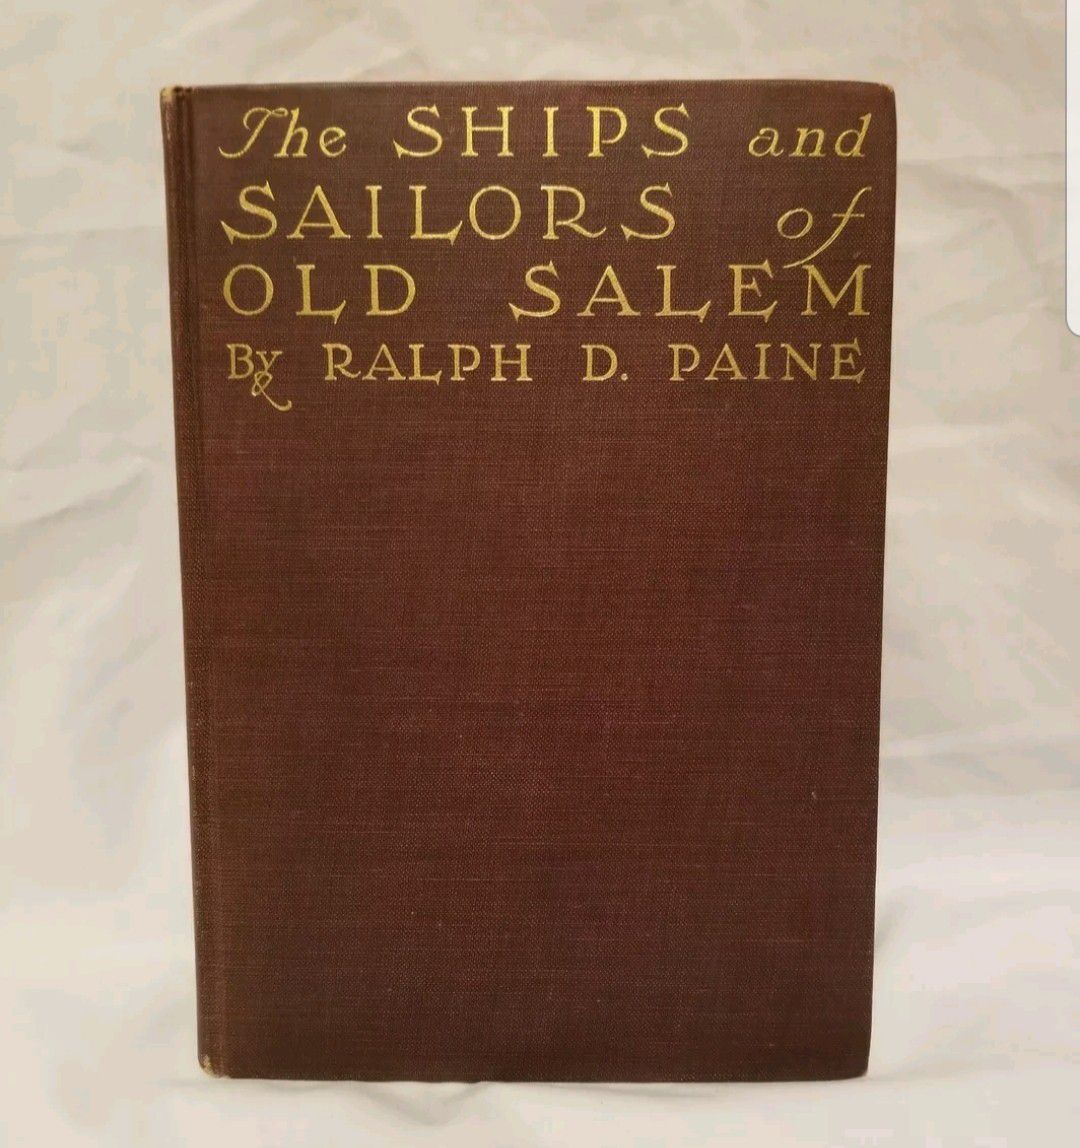 1912 THE SHIPS AND SAILORS OF OLD SALEM BY RALPH D. PAINE